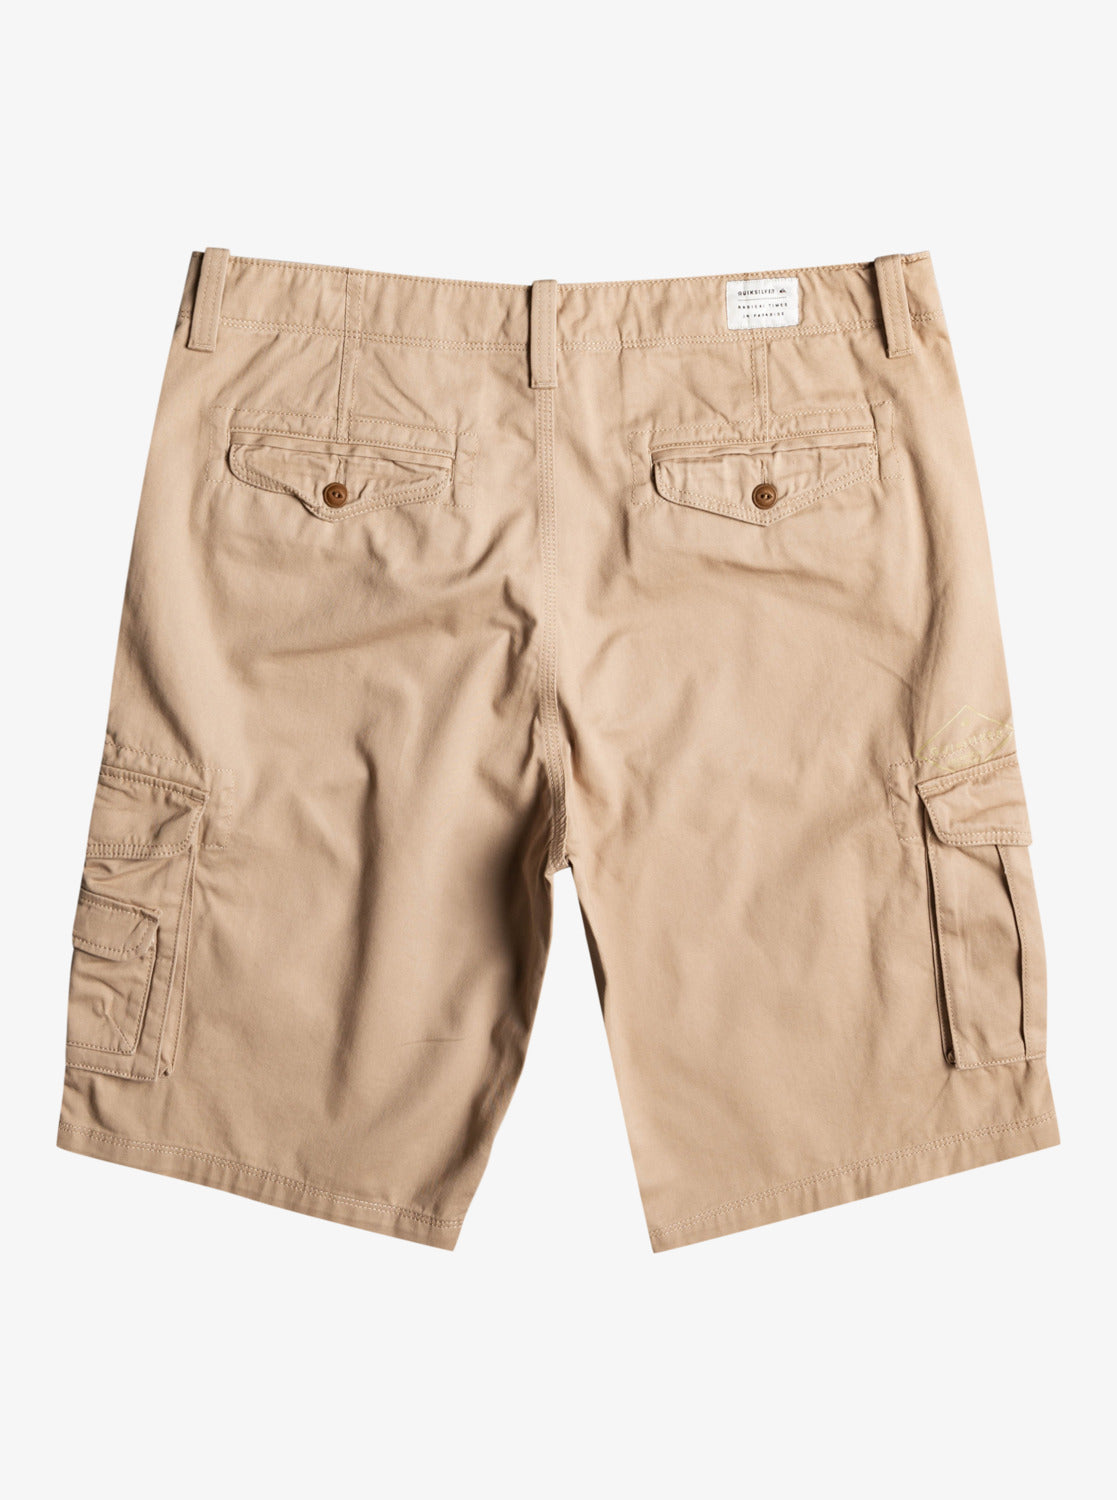 Quiksilver Crucial Battle Cargo Shorts in plage colourway from rear